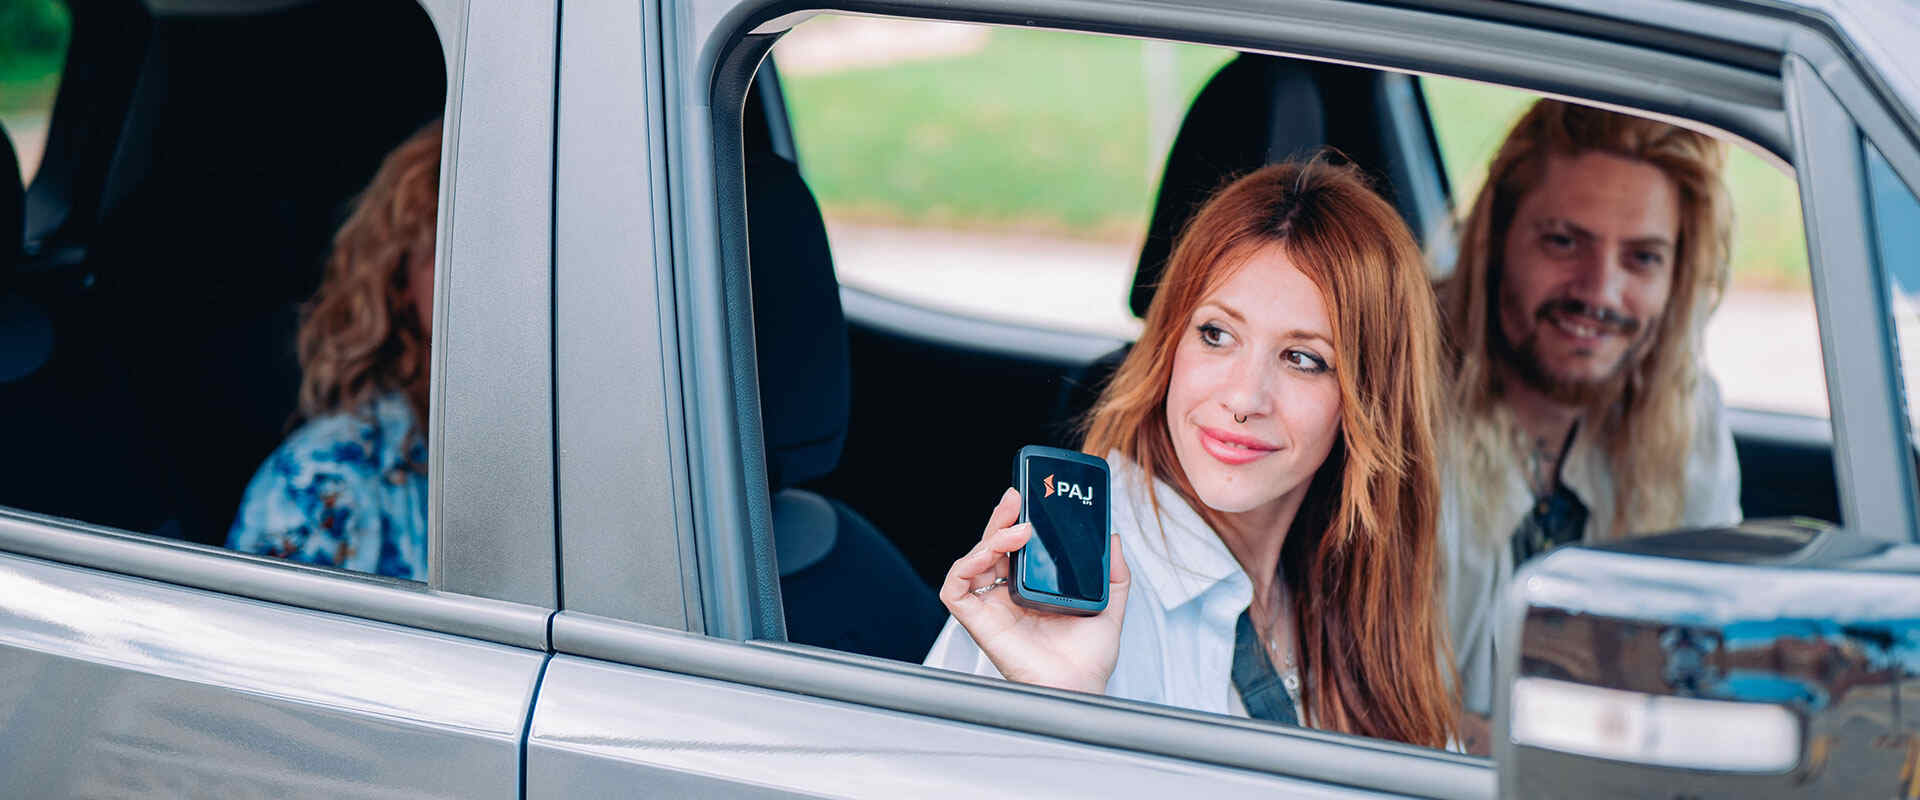 A girl sitting in car showing paj gps tracker in her hands